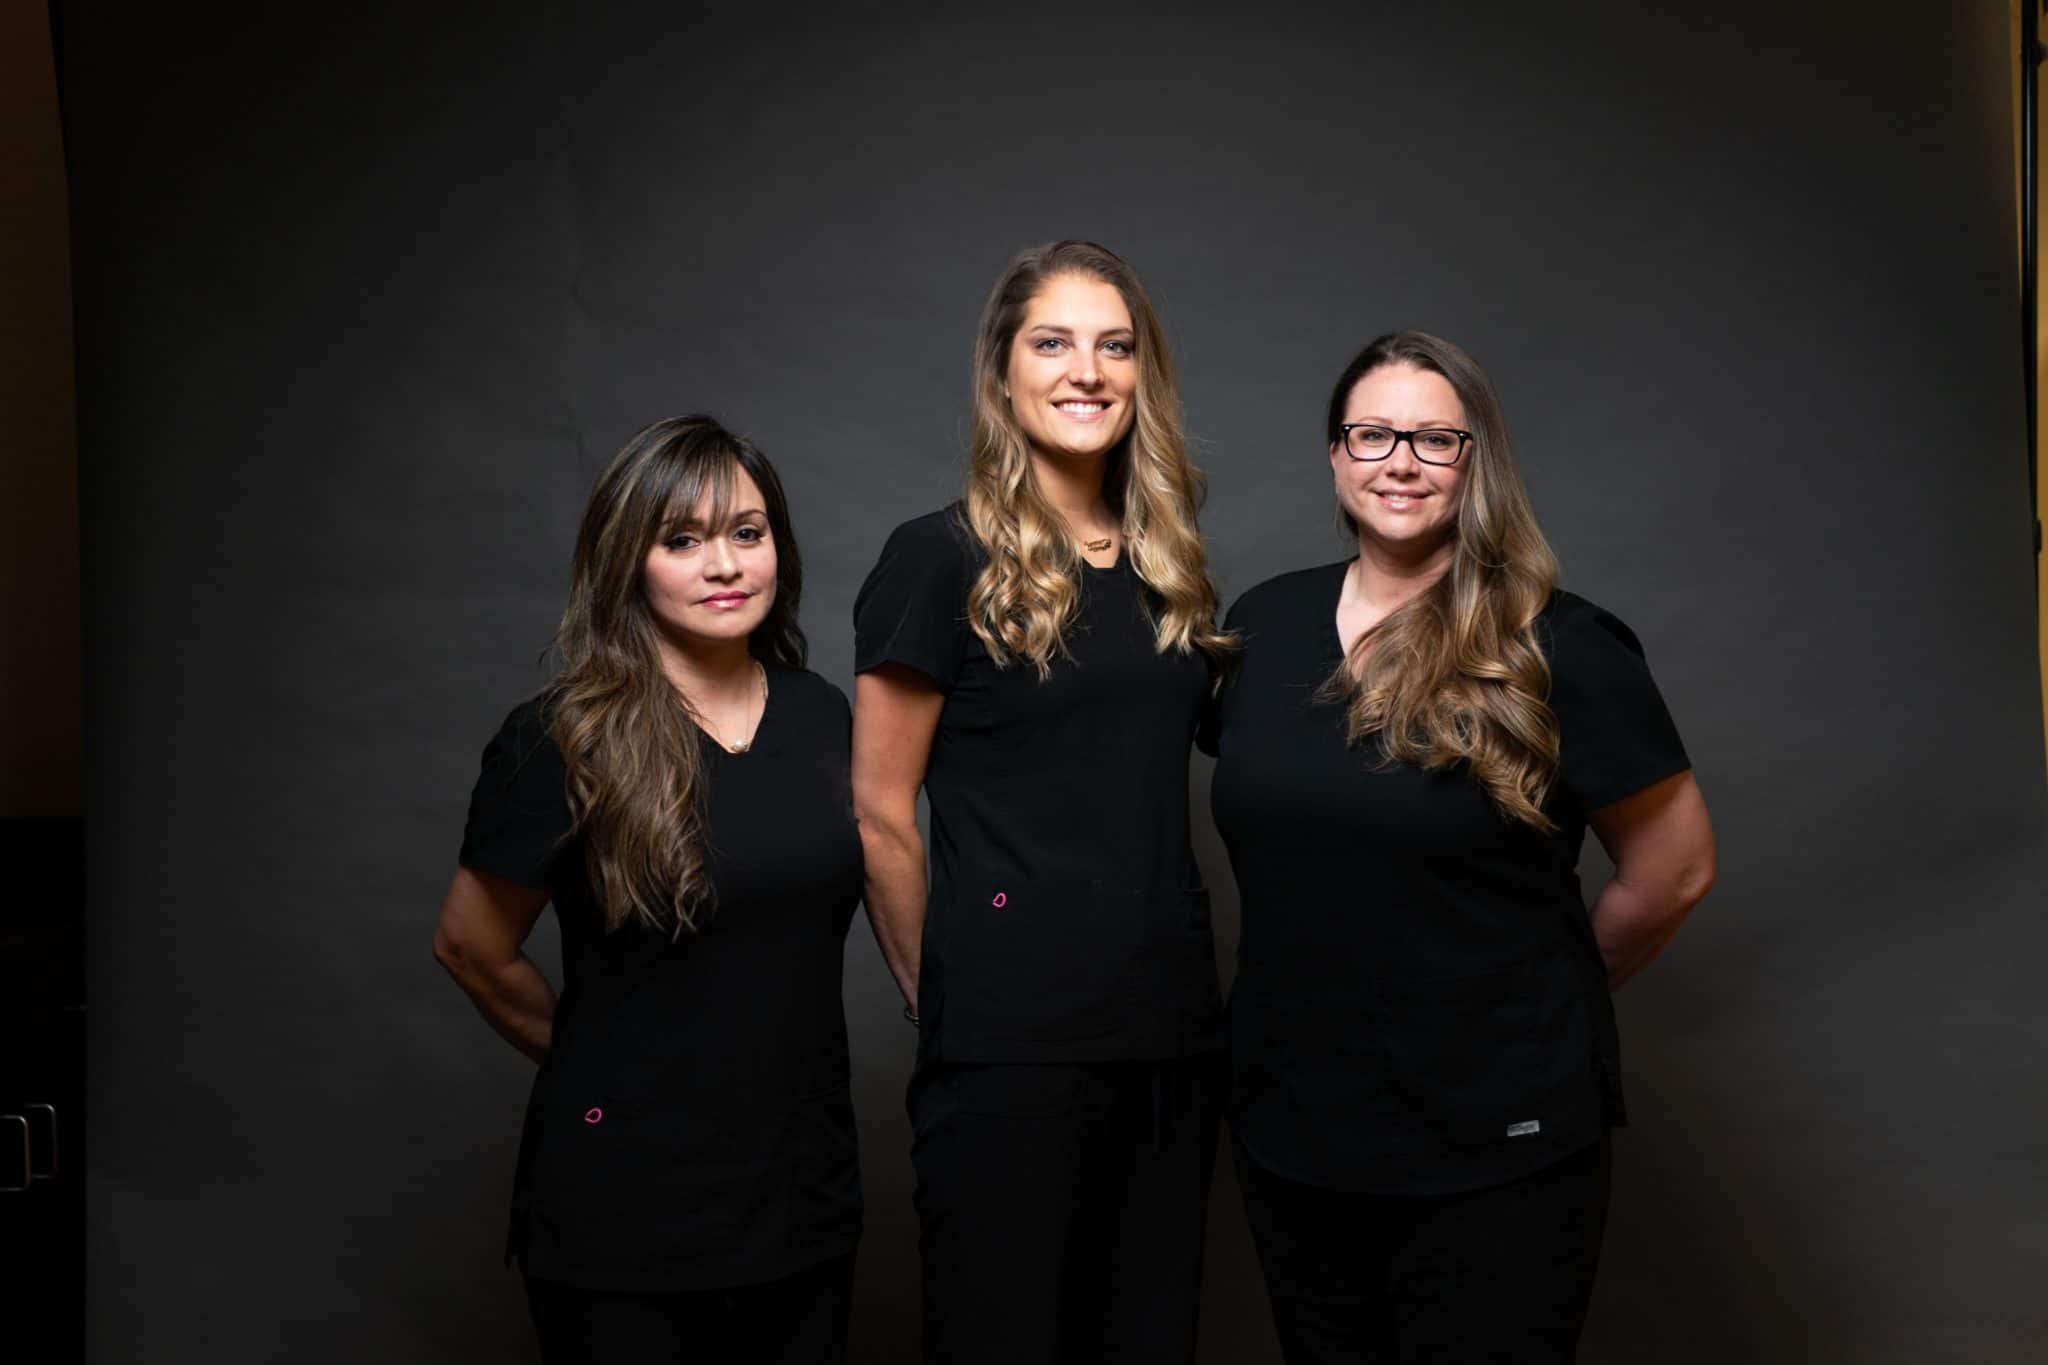 image of Dr. Barrera's staff members (from left to right) Giannine, Jessica and Lori